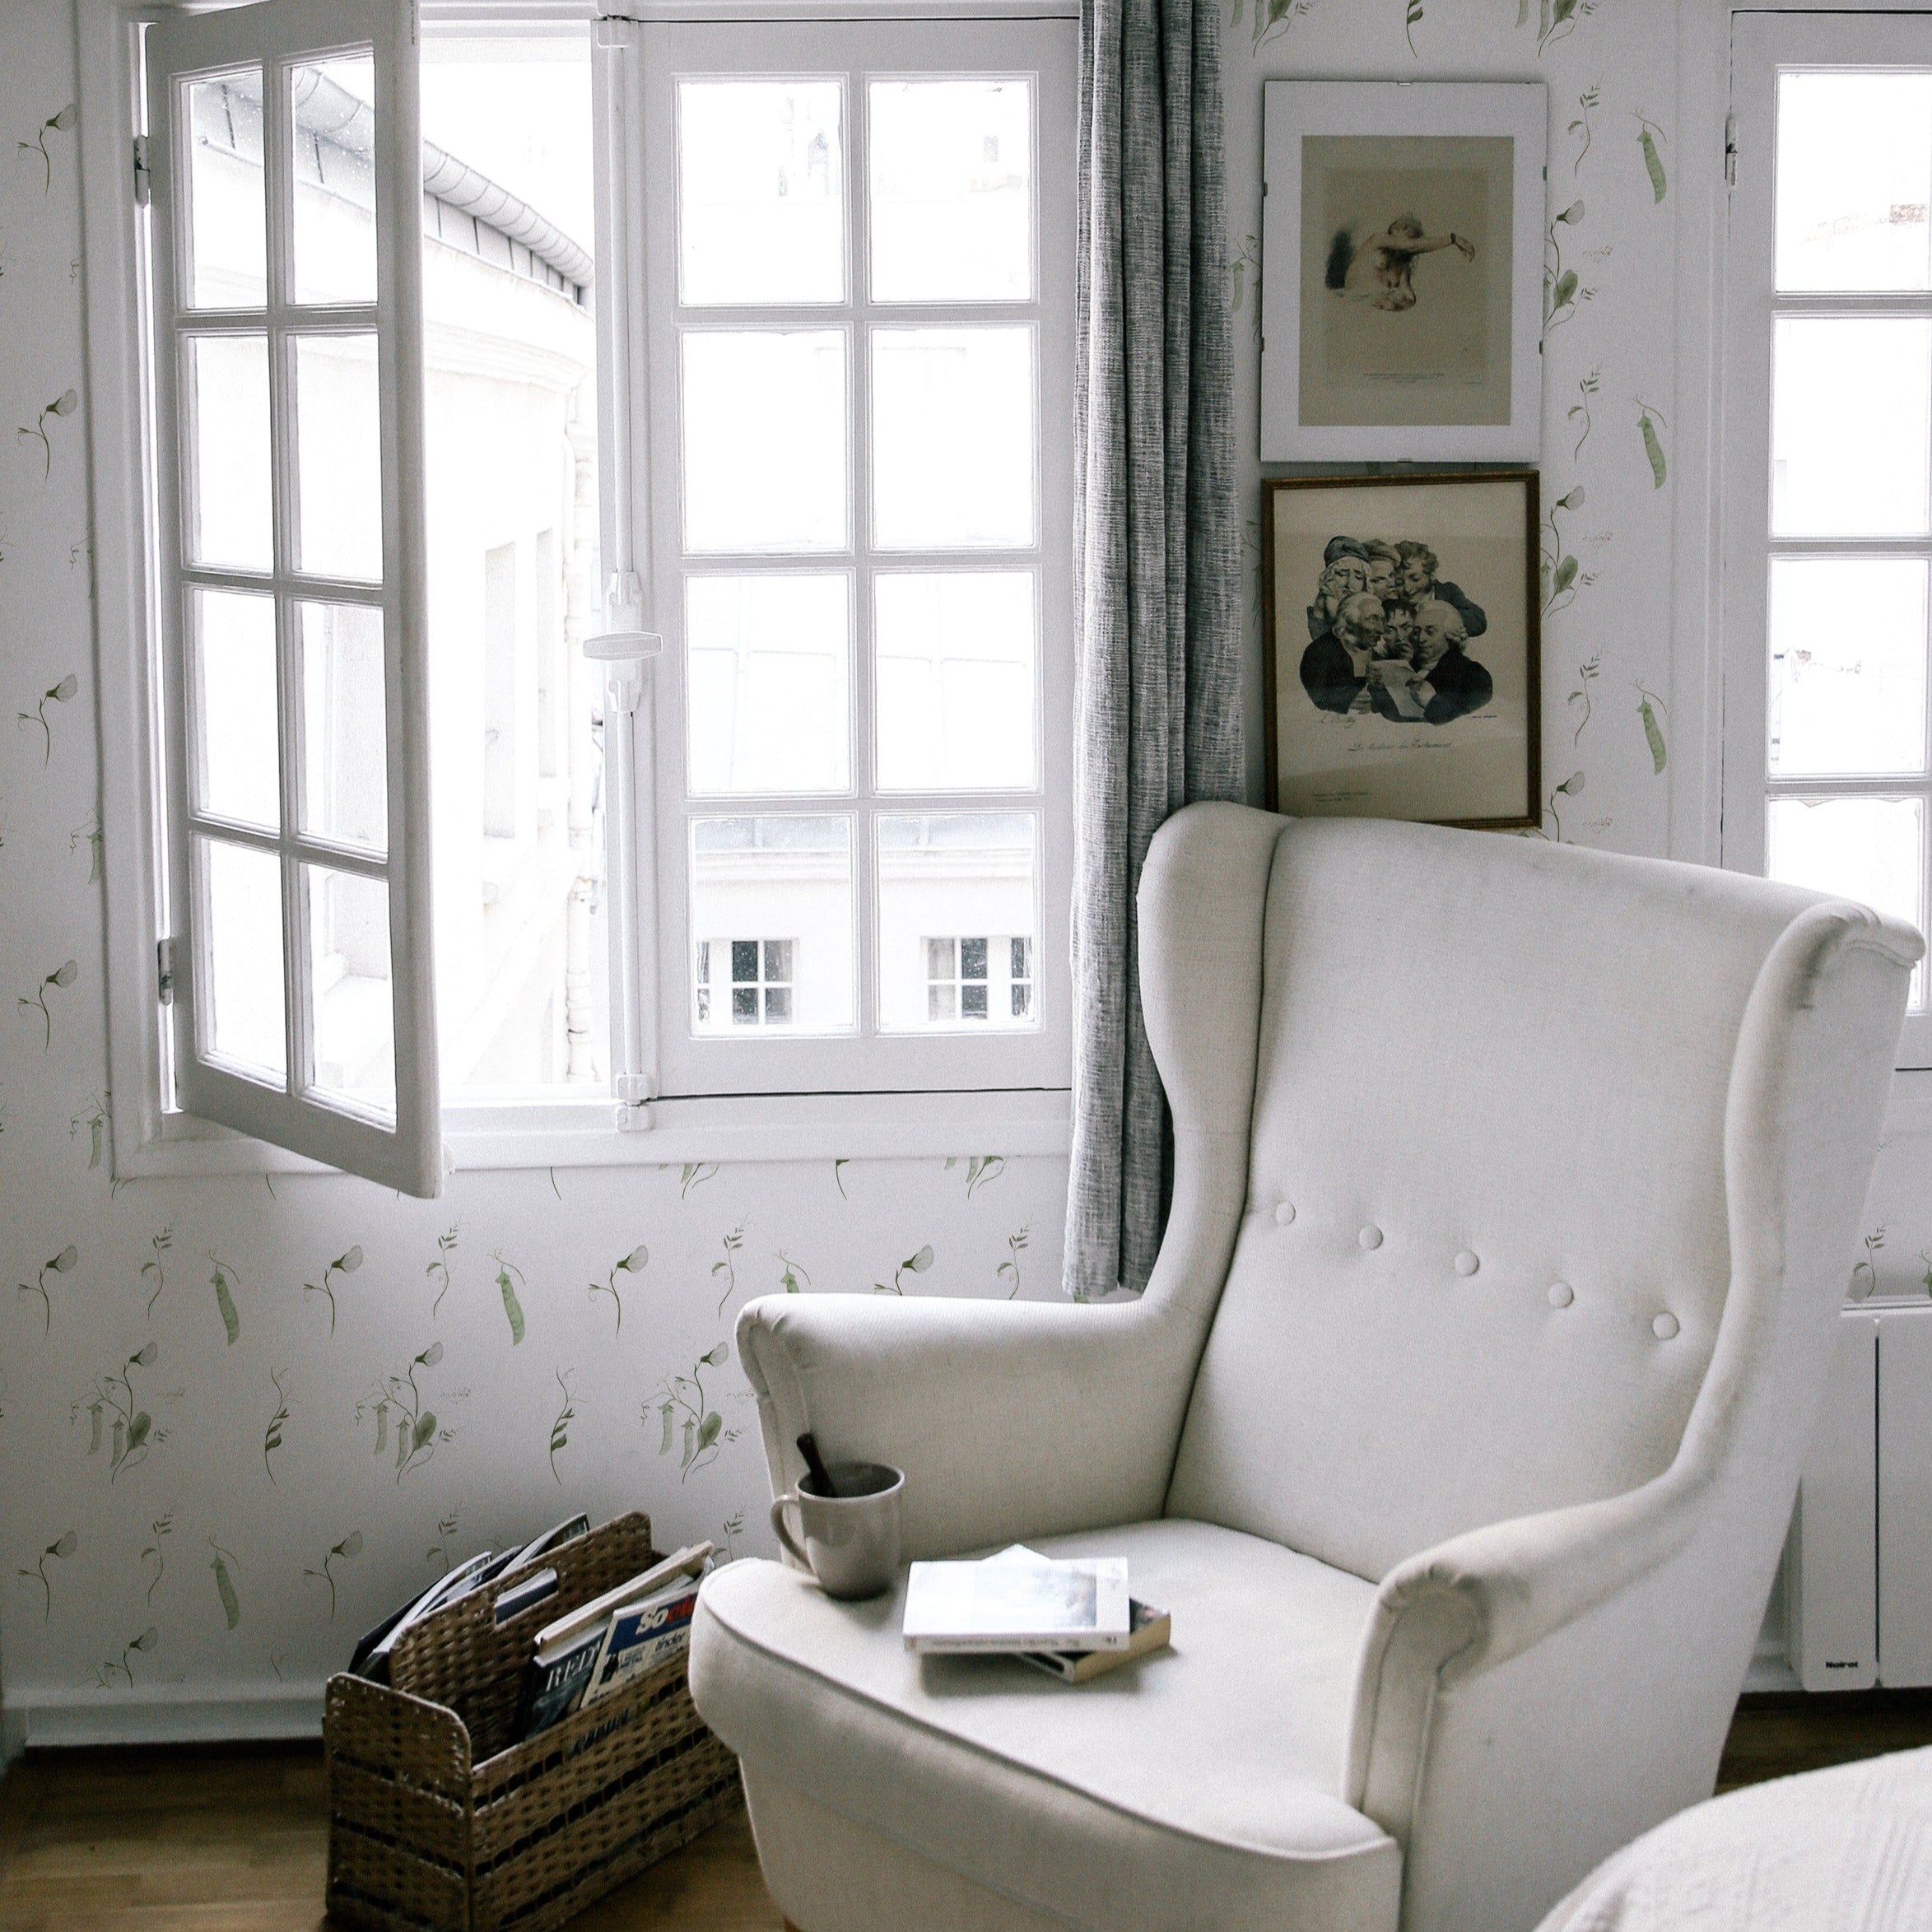 A serene reading nook with a large, plush armchair positioned near a bright window, surrounded by walls adorned with snow pea wallpaper. The scene exudes a calm, inviting atmosphere enhanced by natural light and minimalist decor.